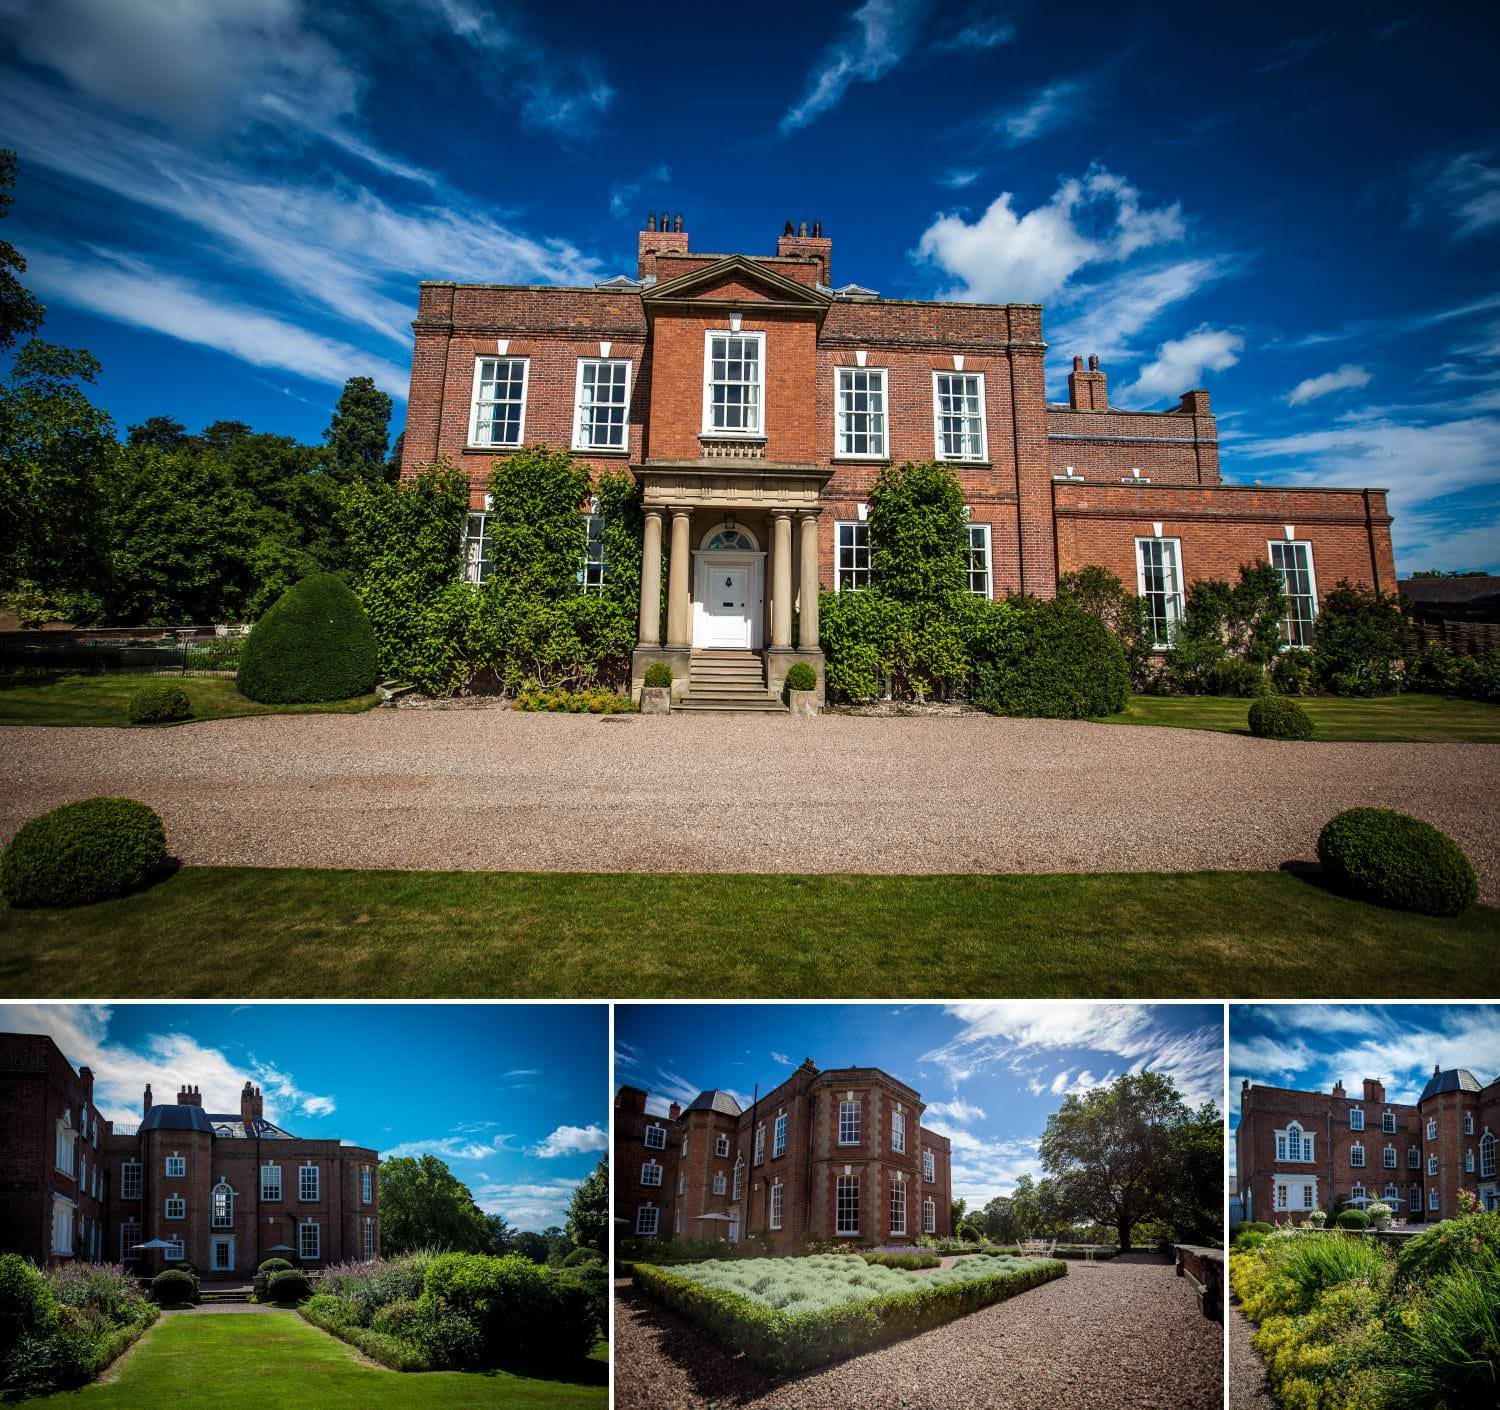 Wedding Photography of the building at Iscoyd Park, Whitchurch